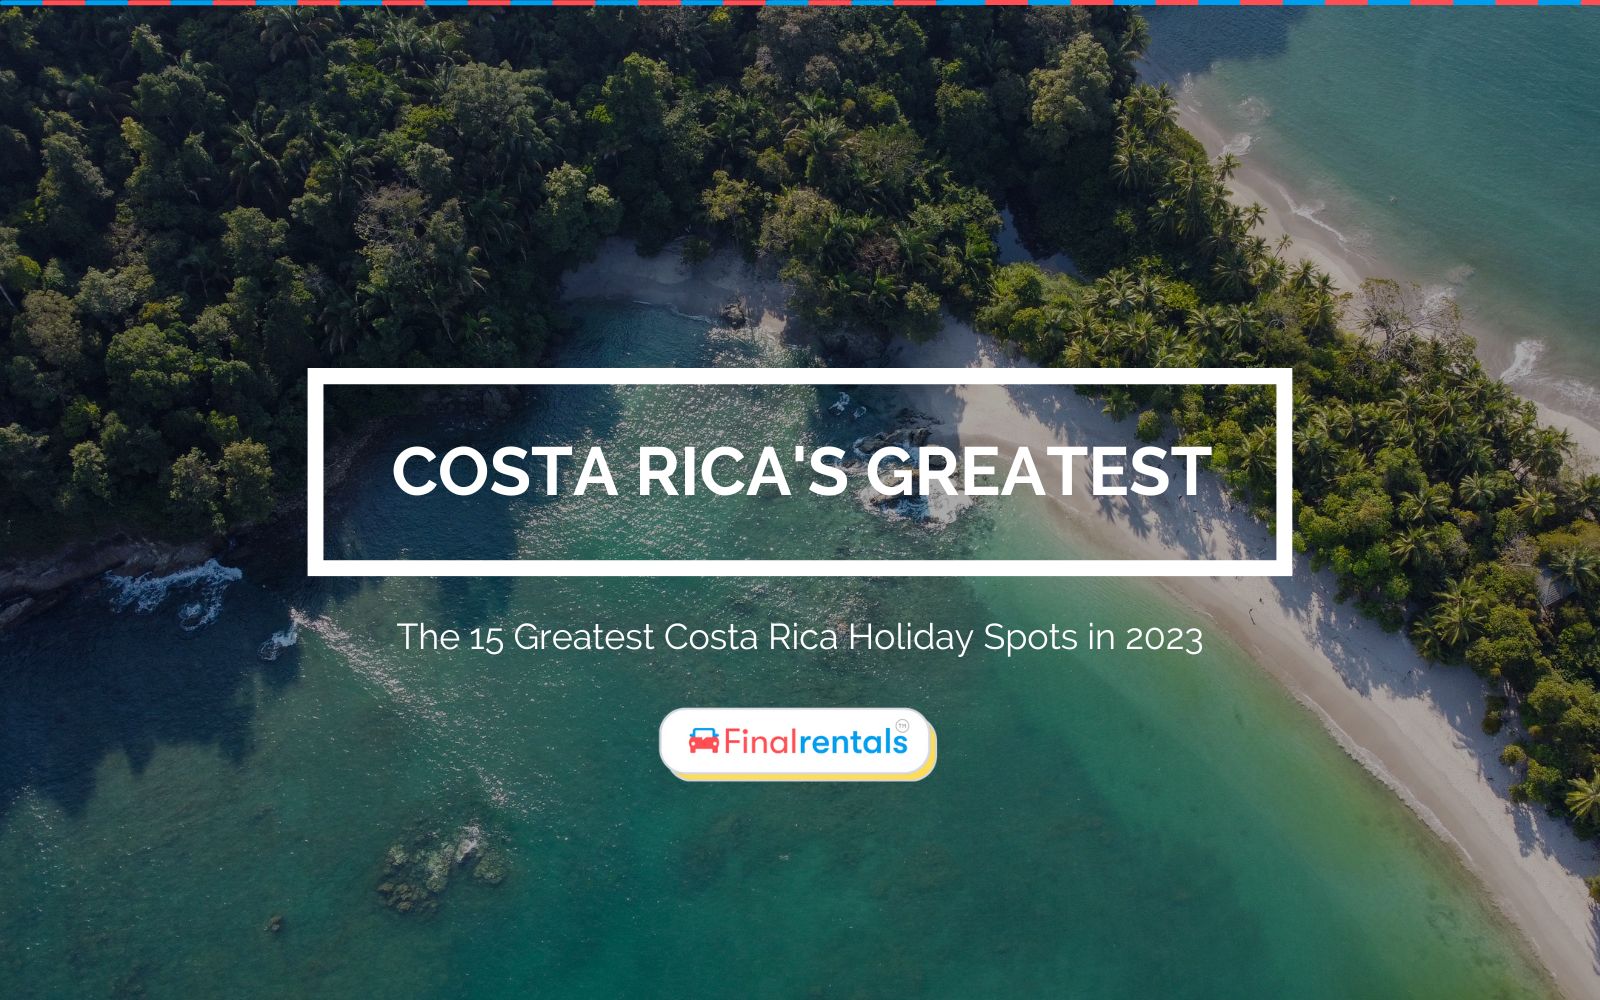 The 15 Greatest Costa Rica Holiday Spots in 2023